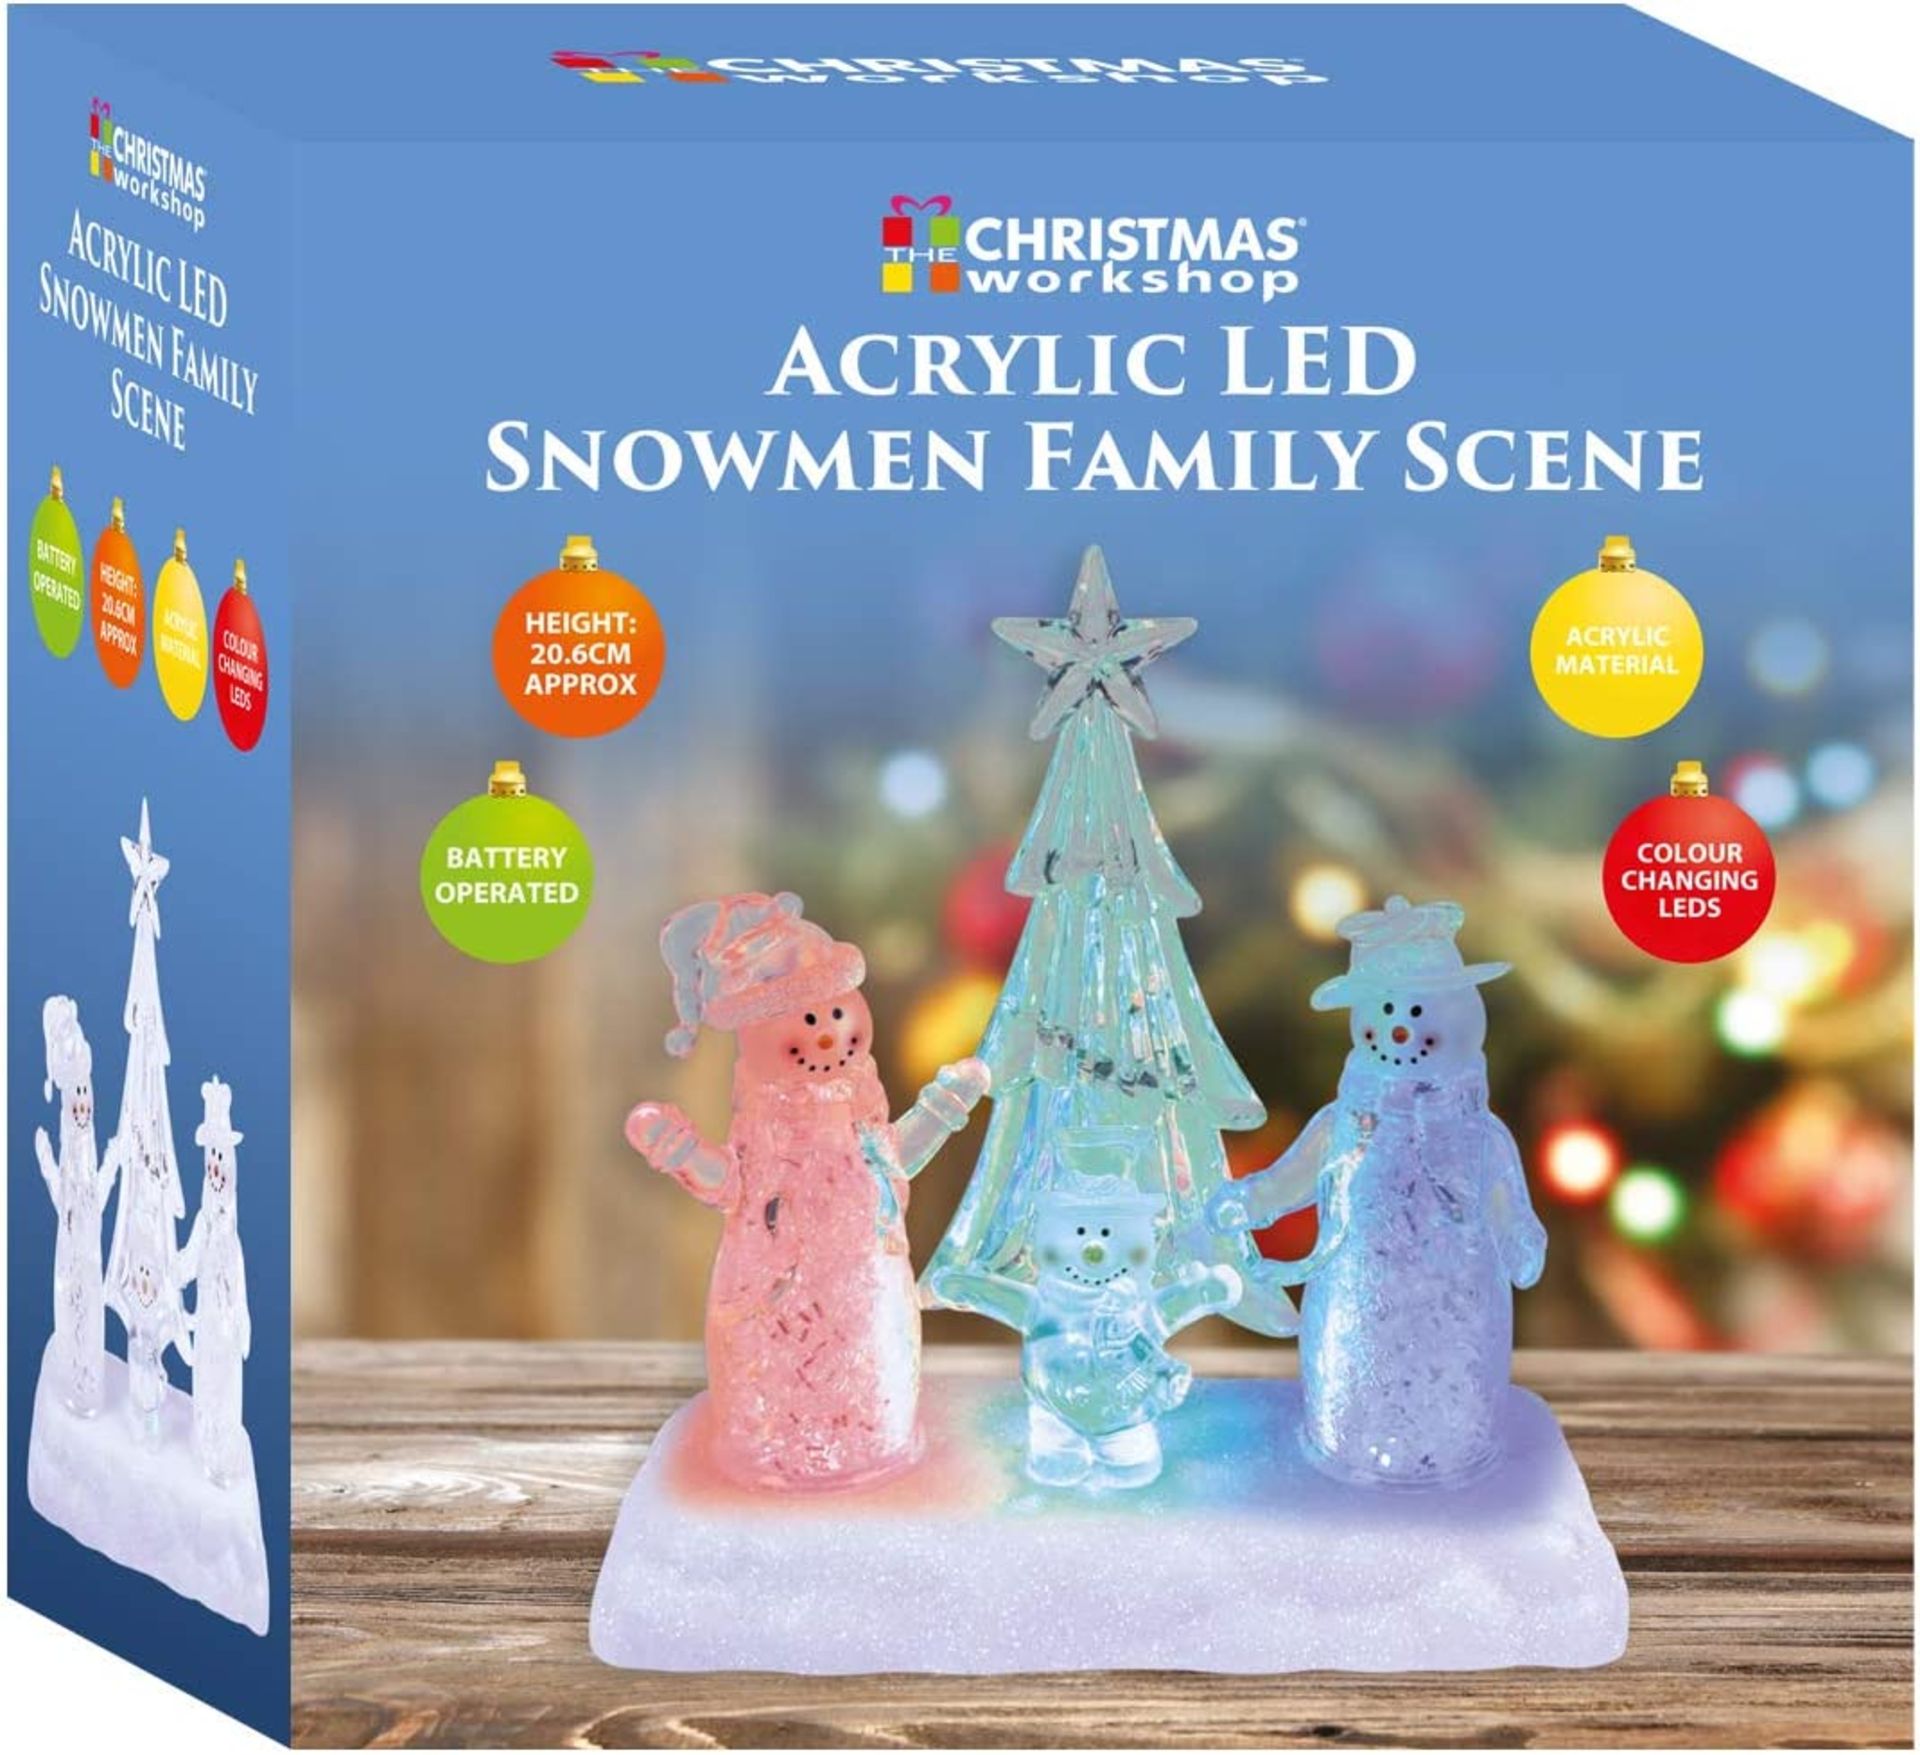 Christmas Workshop Acrylic Snowman Family Scene Colour Changing LED Lights